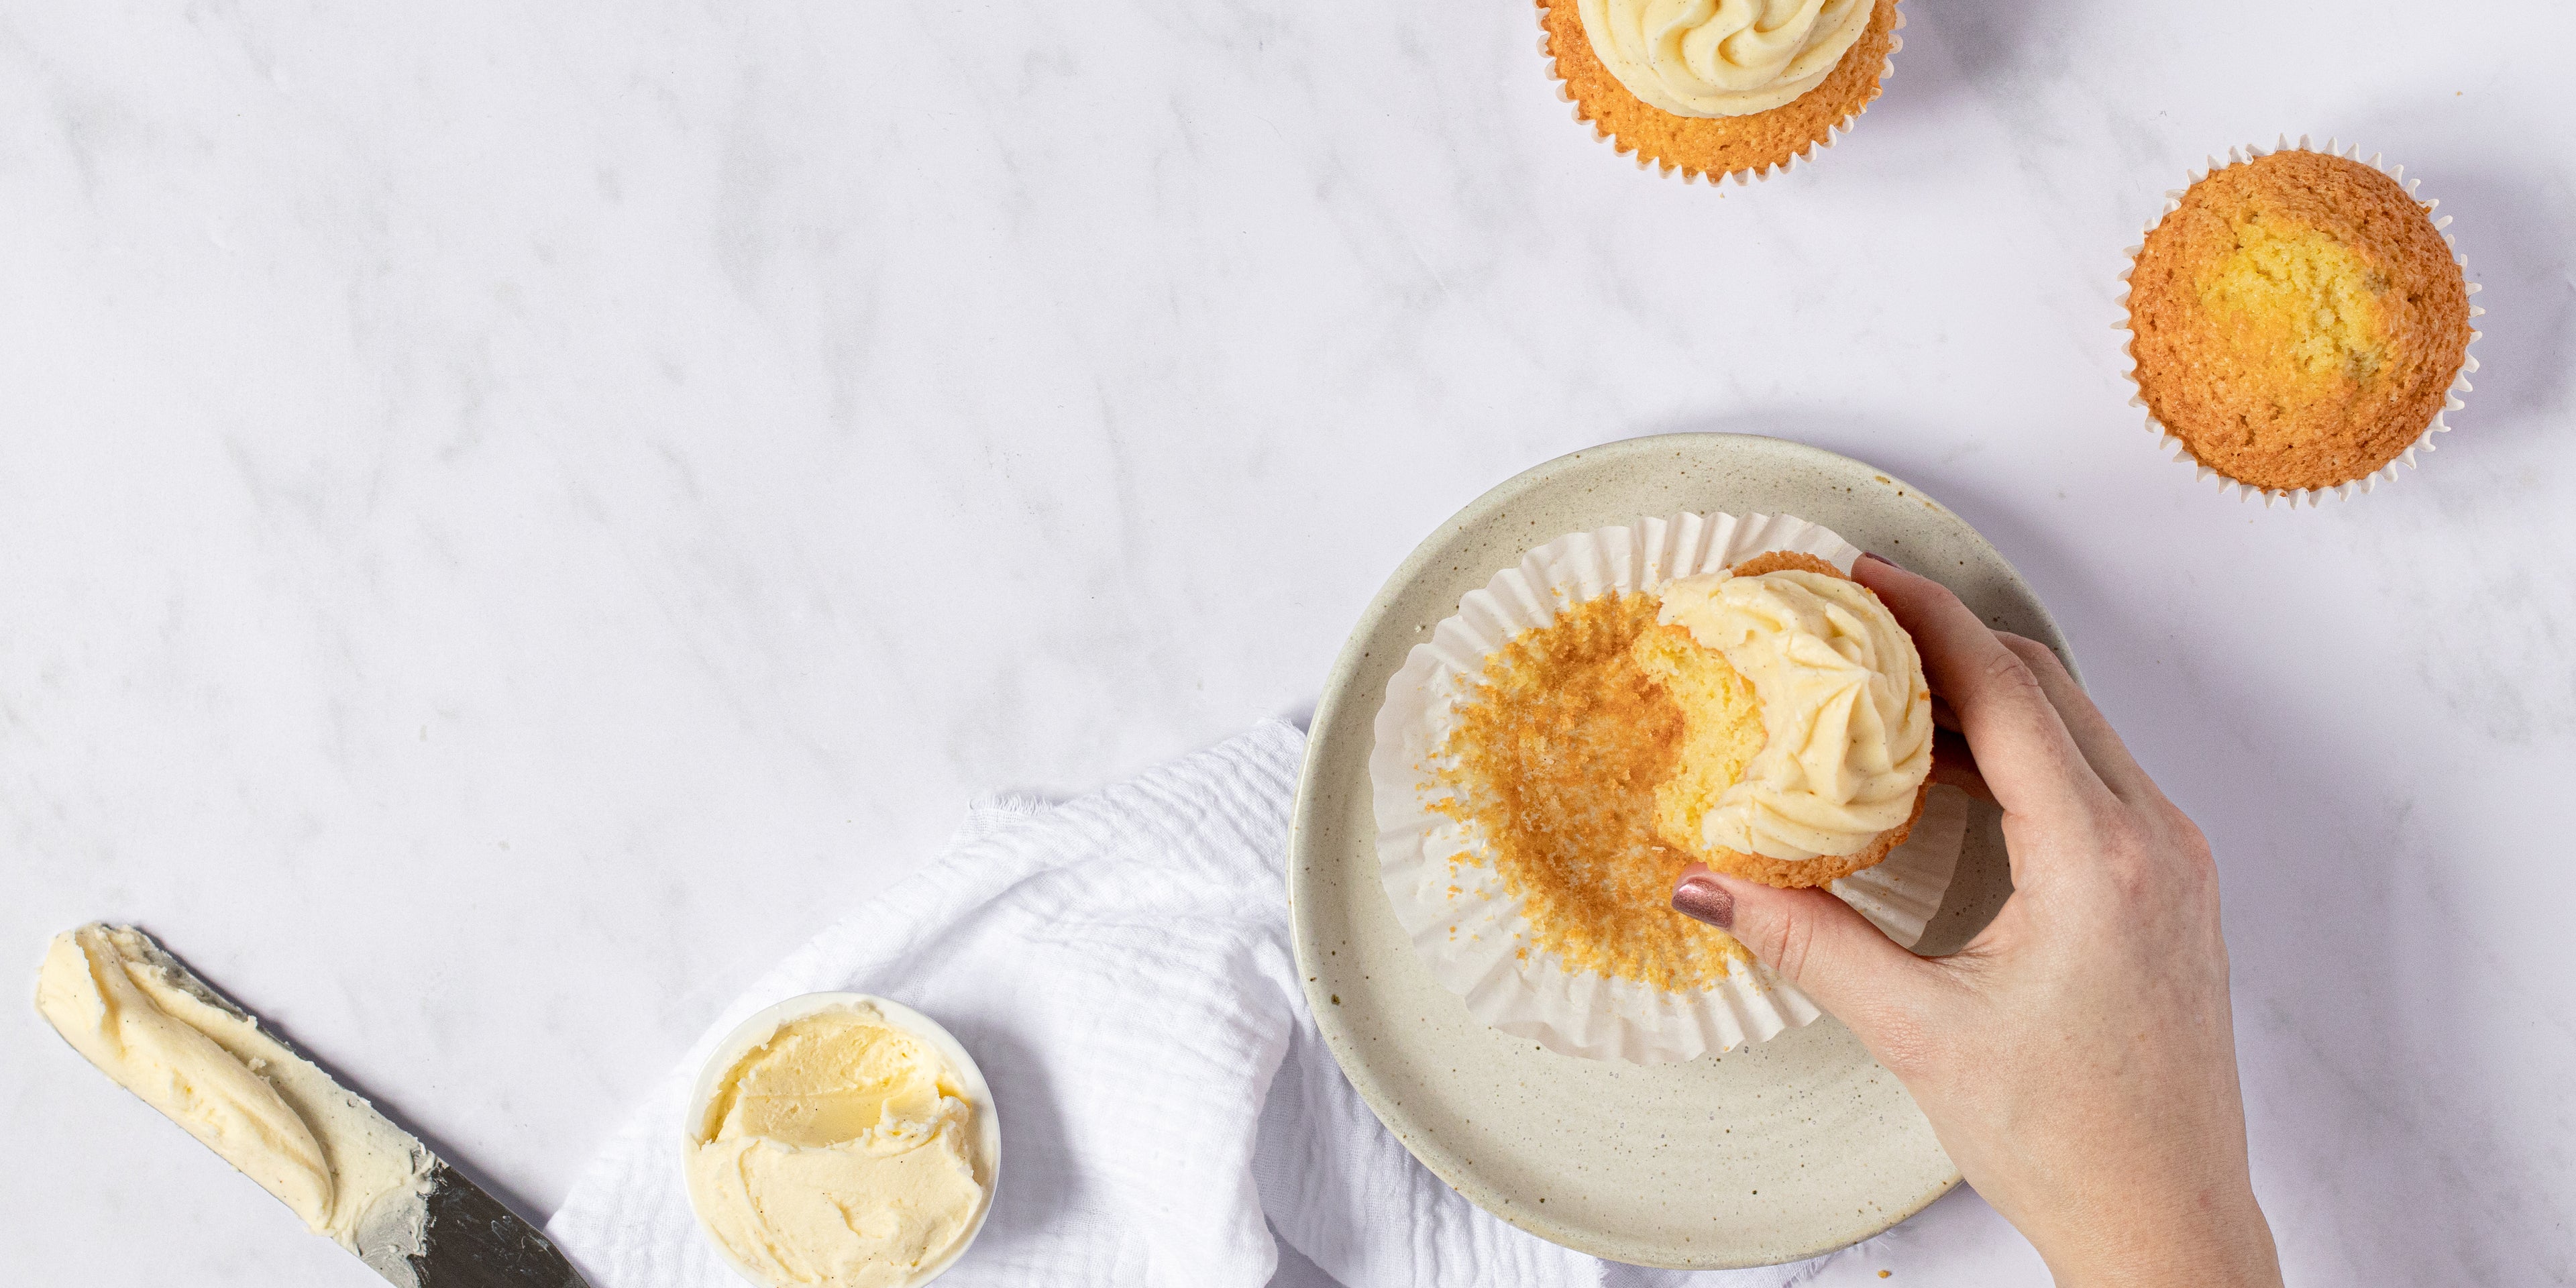 Hand holding a vanilla cupcake topped with vanilla buttercream bitten into